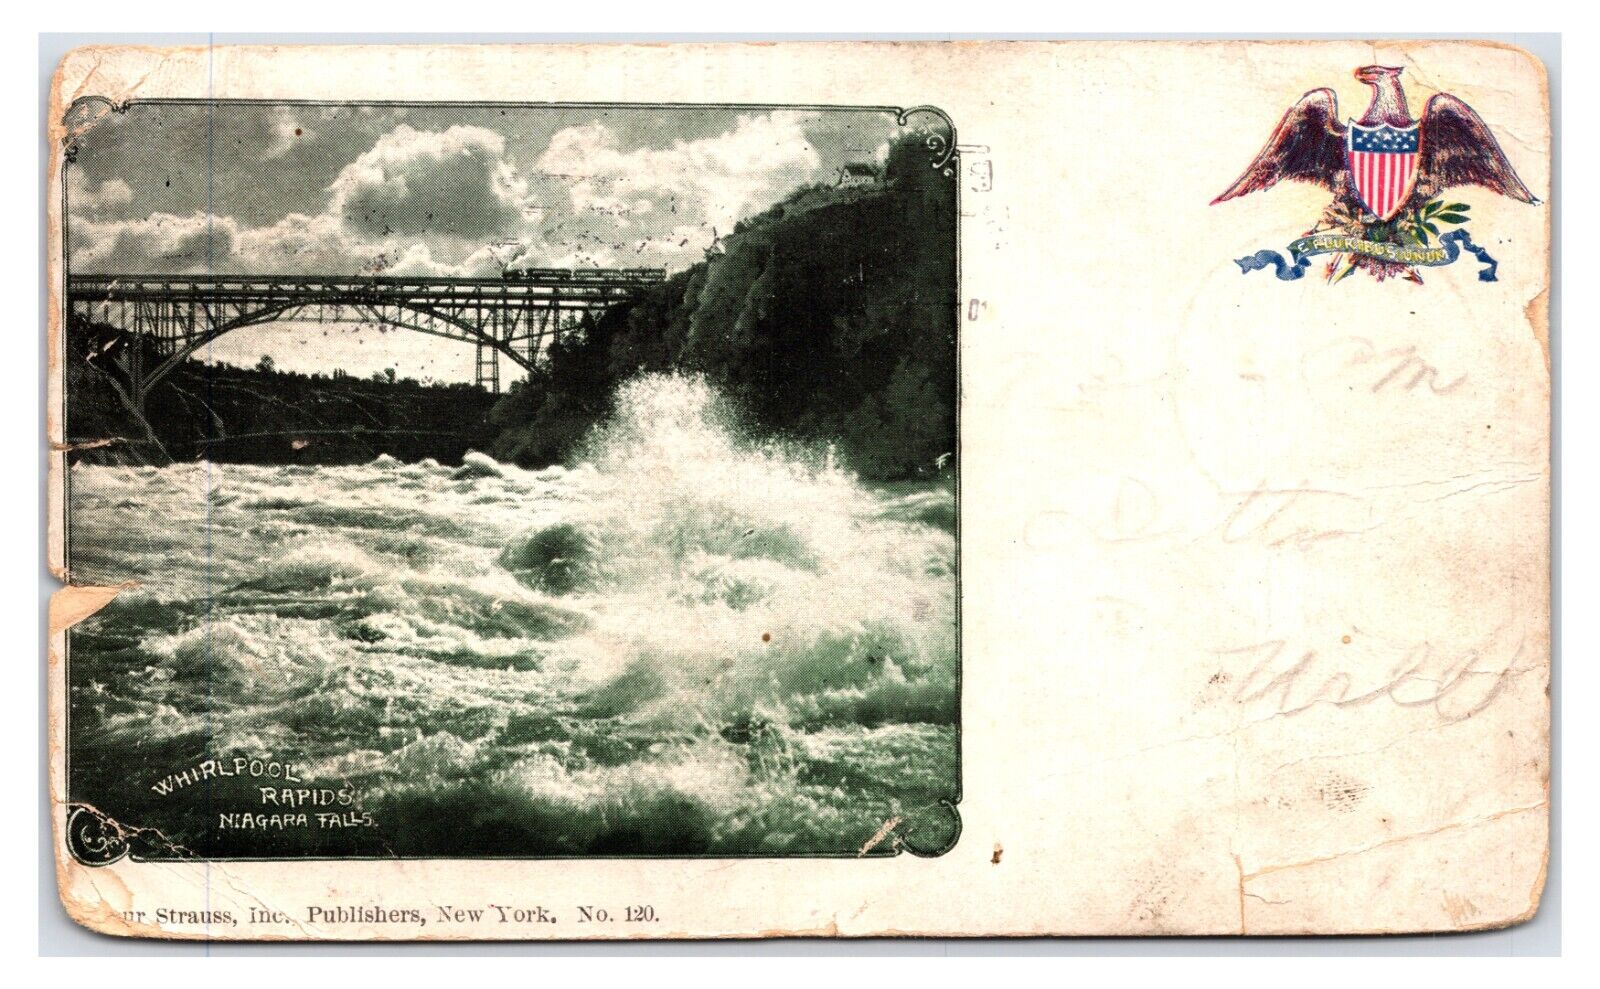 Early 1900s - Niagara Falls, New York - Private Mailing Card (Posted 1901)